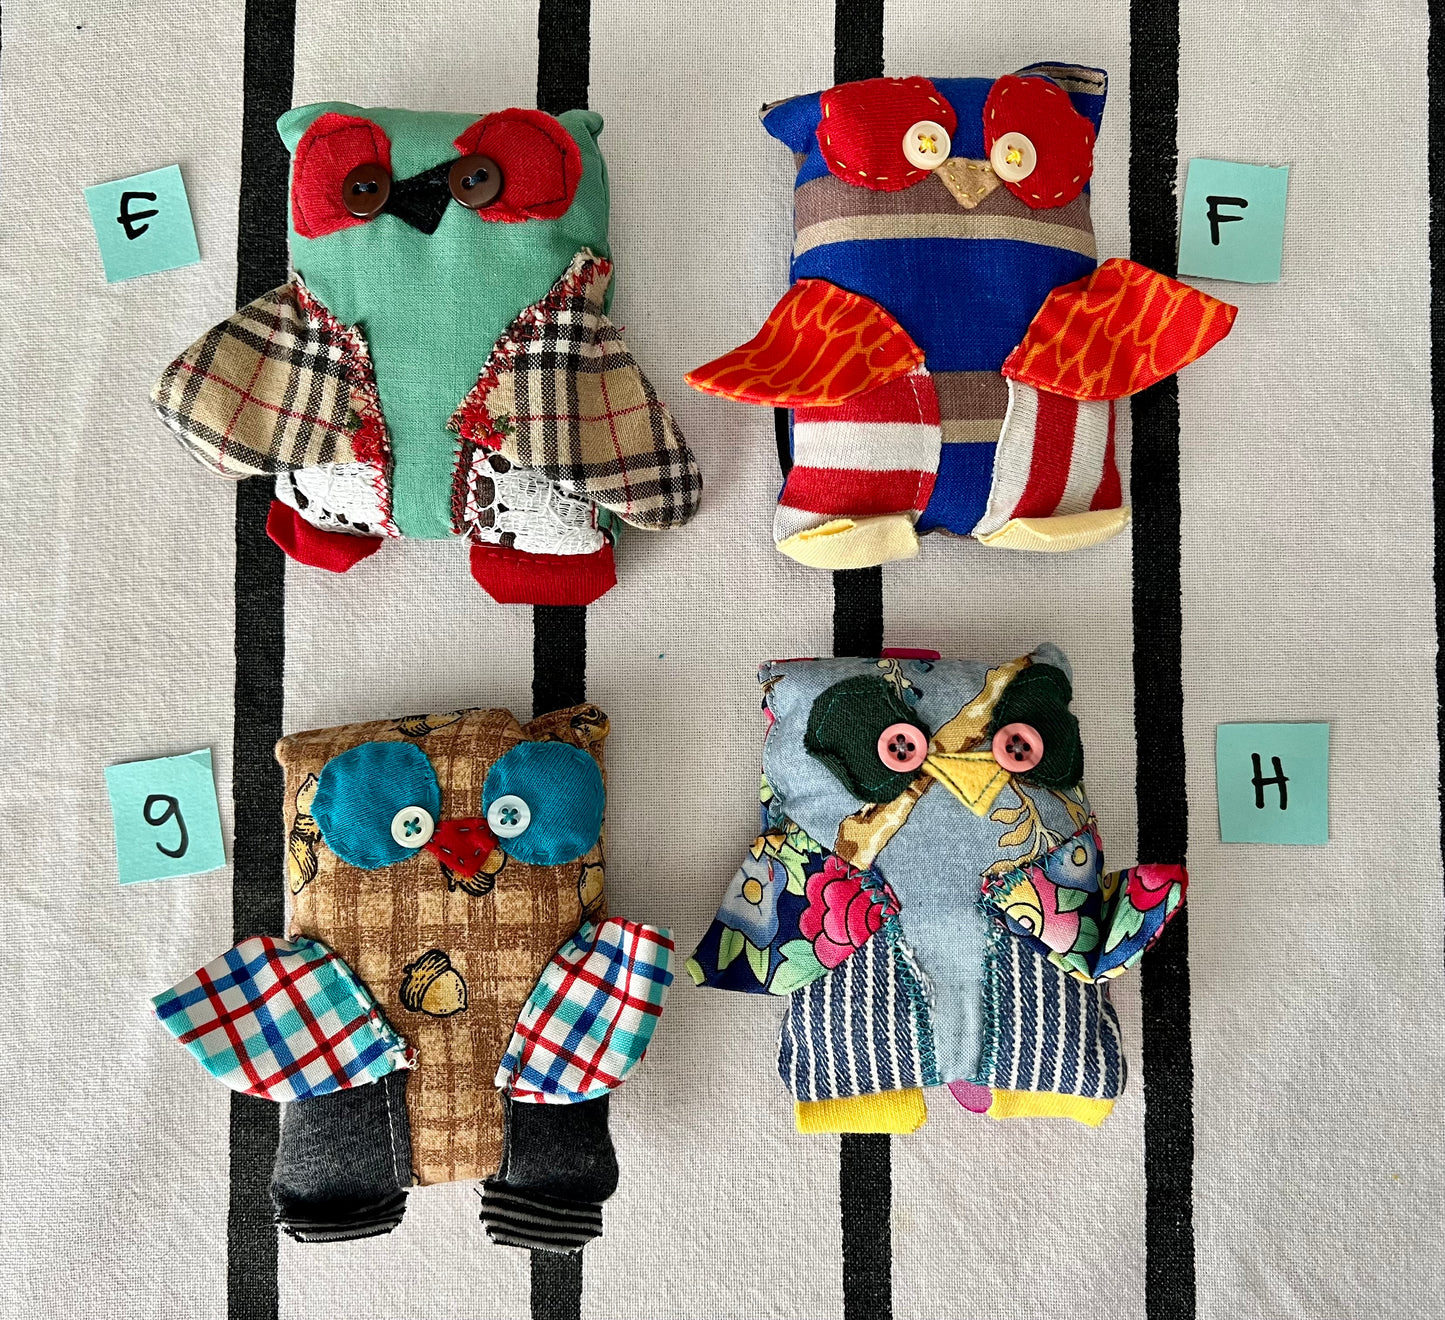 front view of mini animals with letters E F G H next to each one.